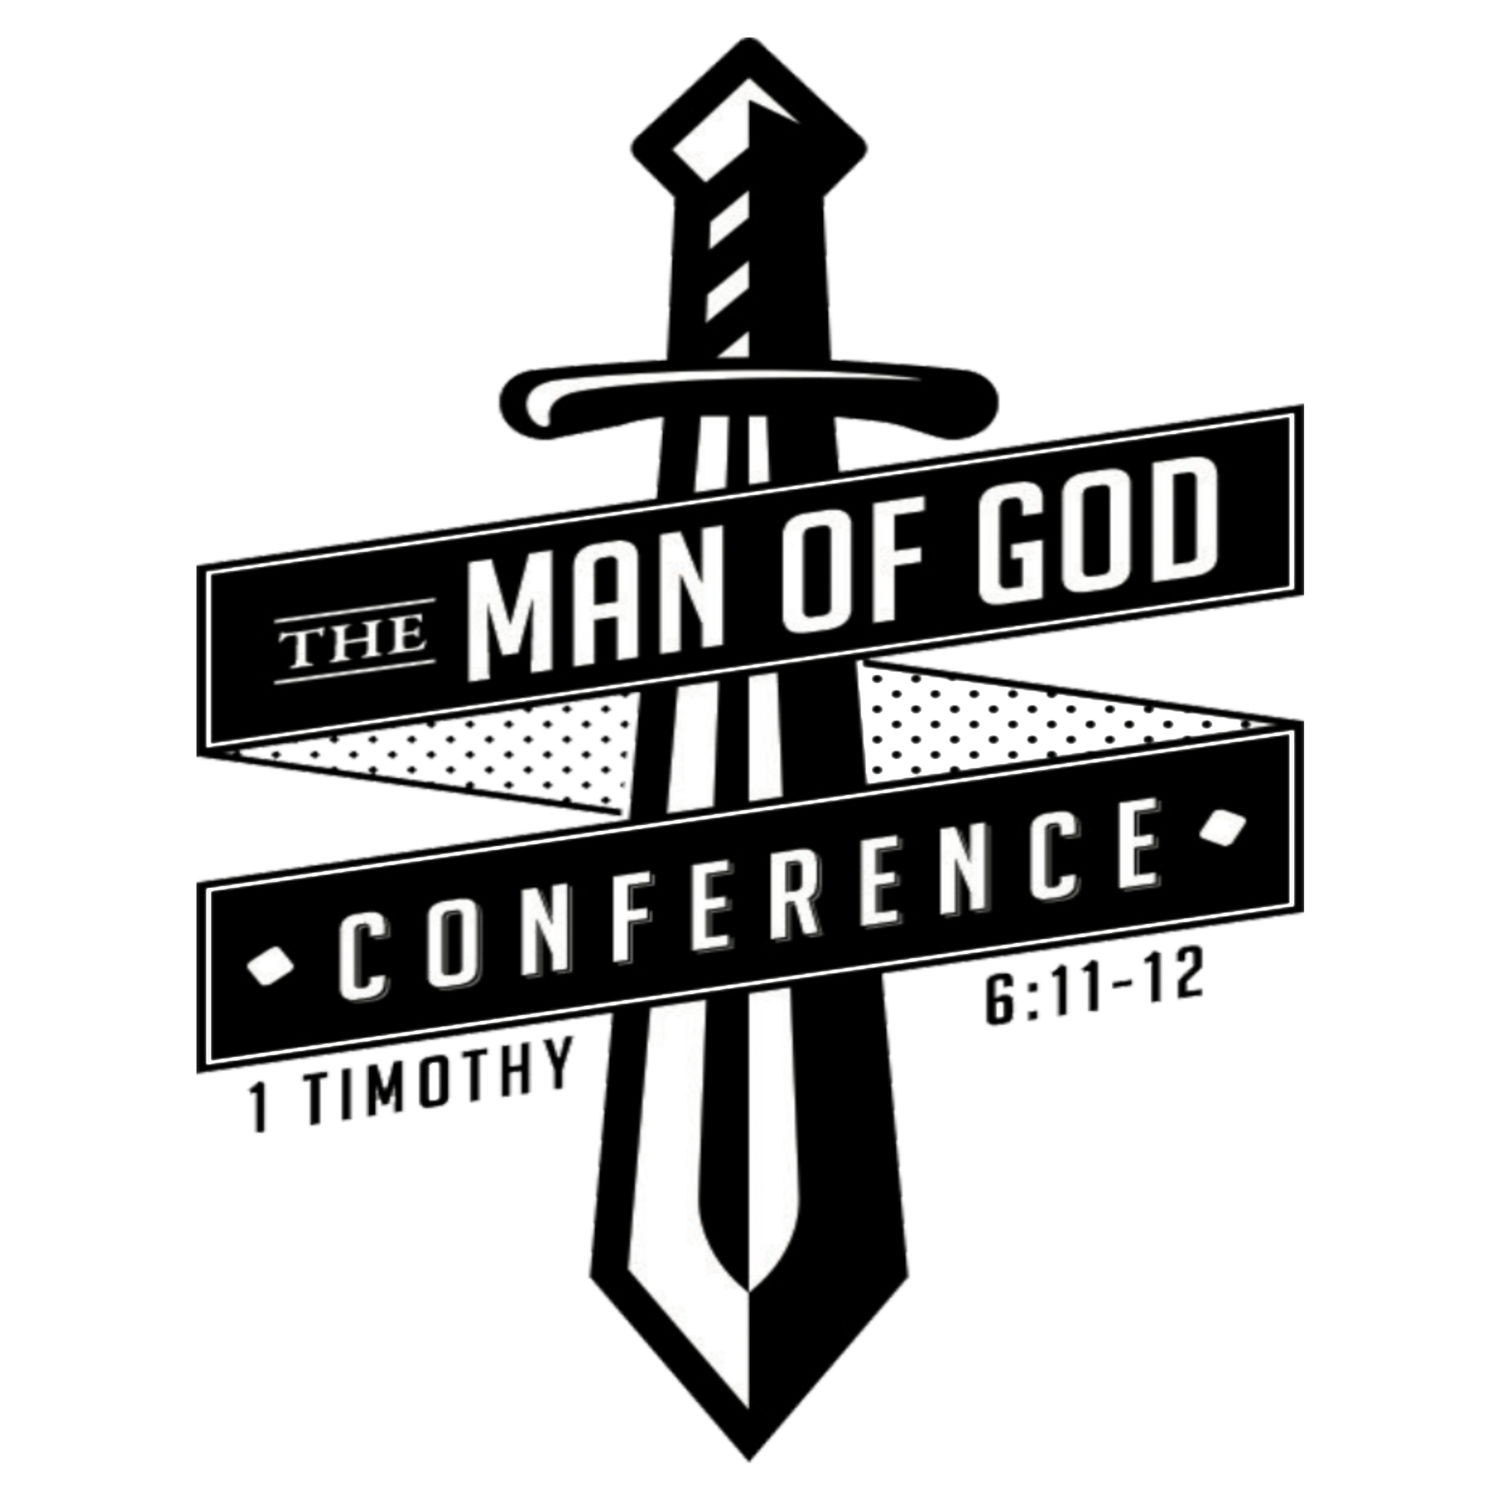 THE MAN OF GOD CONFERENCE